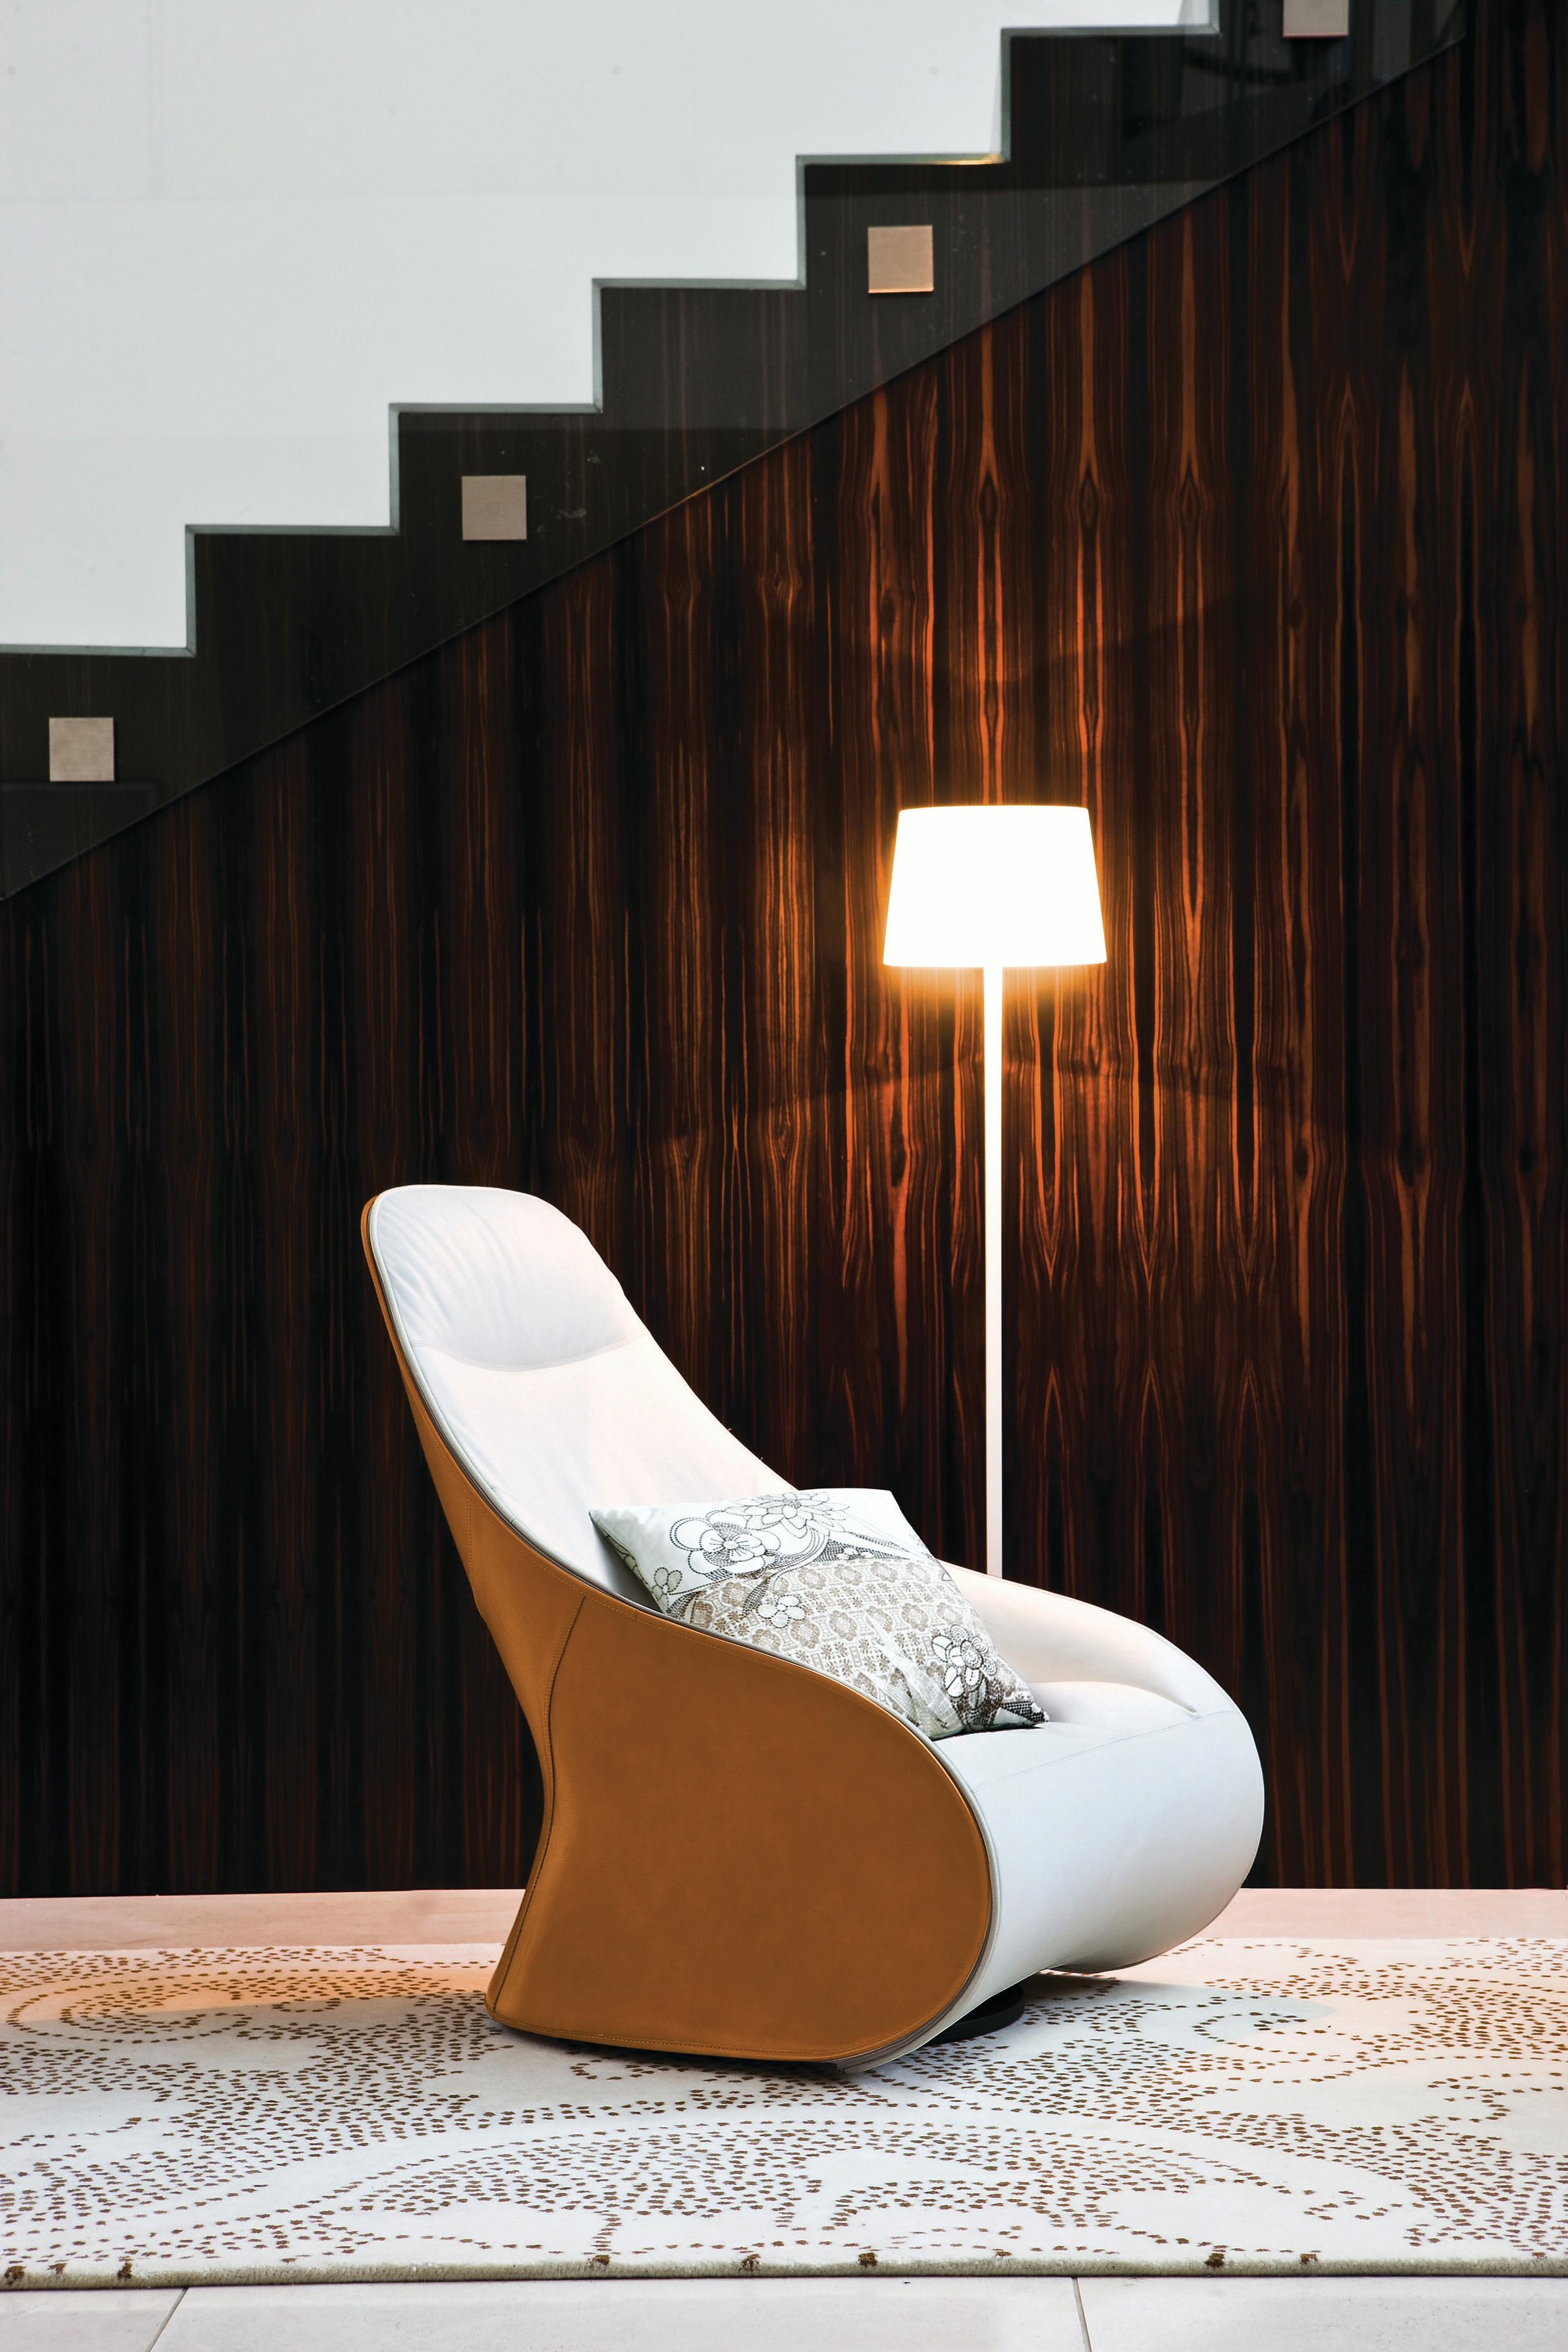 Zanotta Derby Armchair with Pouf in White Upholstery by Noé Duchaufour Lawrance

Swivel steel base, or fixed with feet. Stiff polyurethane external body covered with cowhide 95. Cannot be covered with cowhide 95 in the shade white 0704. Internal